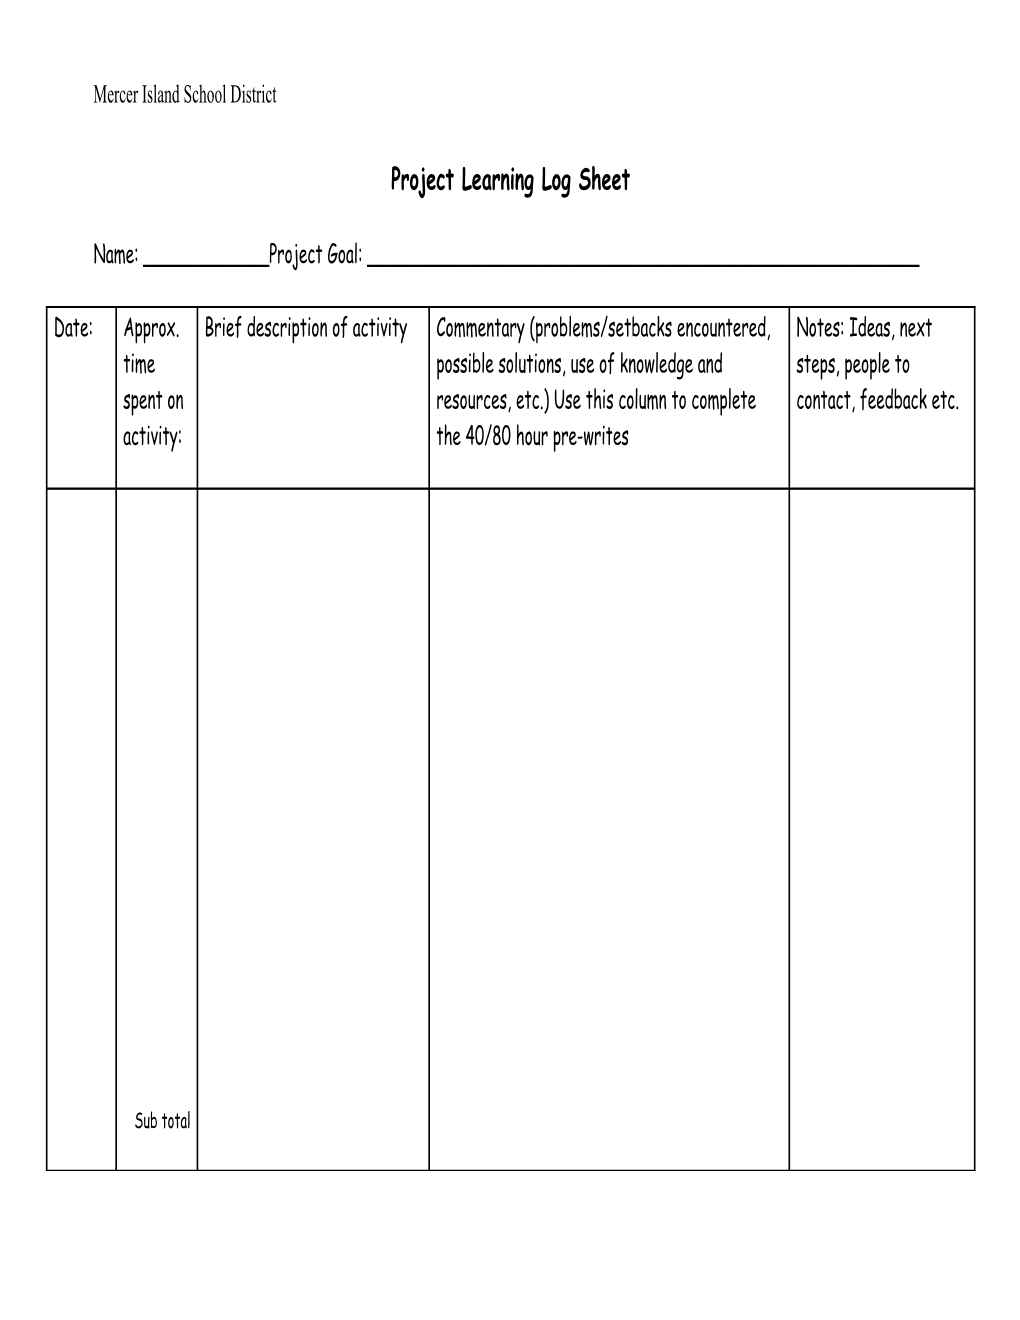 Midpoint Learning Log (40 Hour) Worksheet